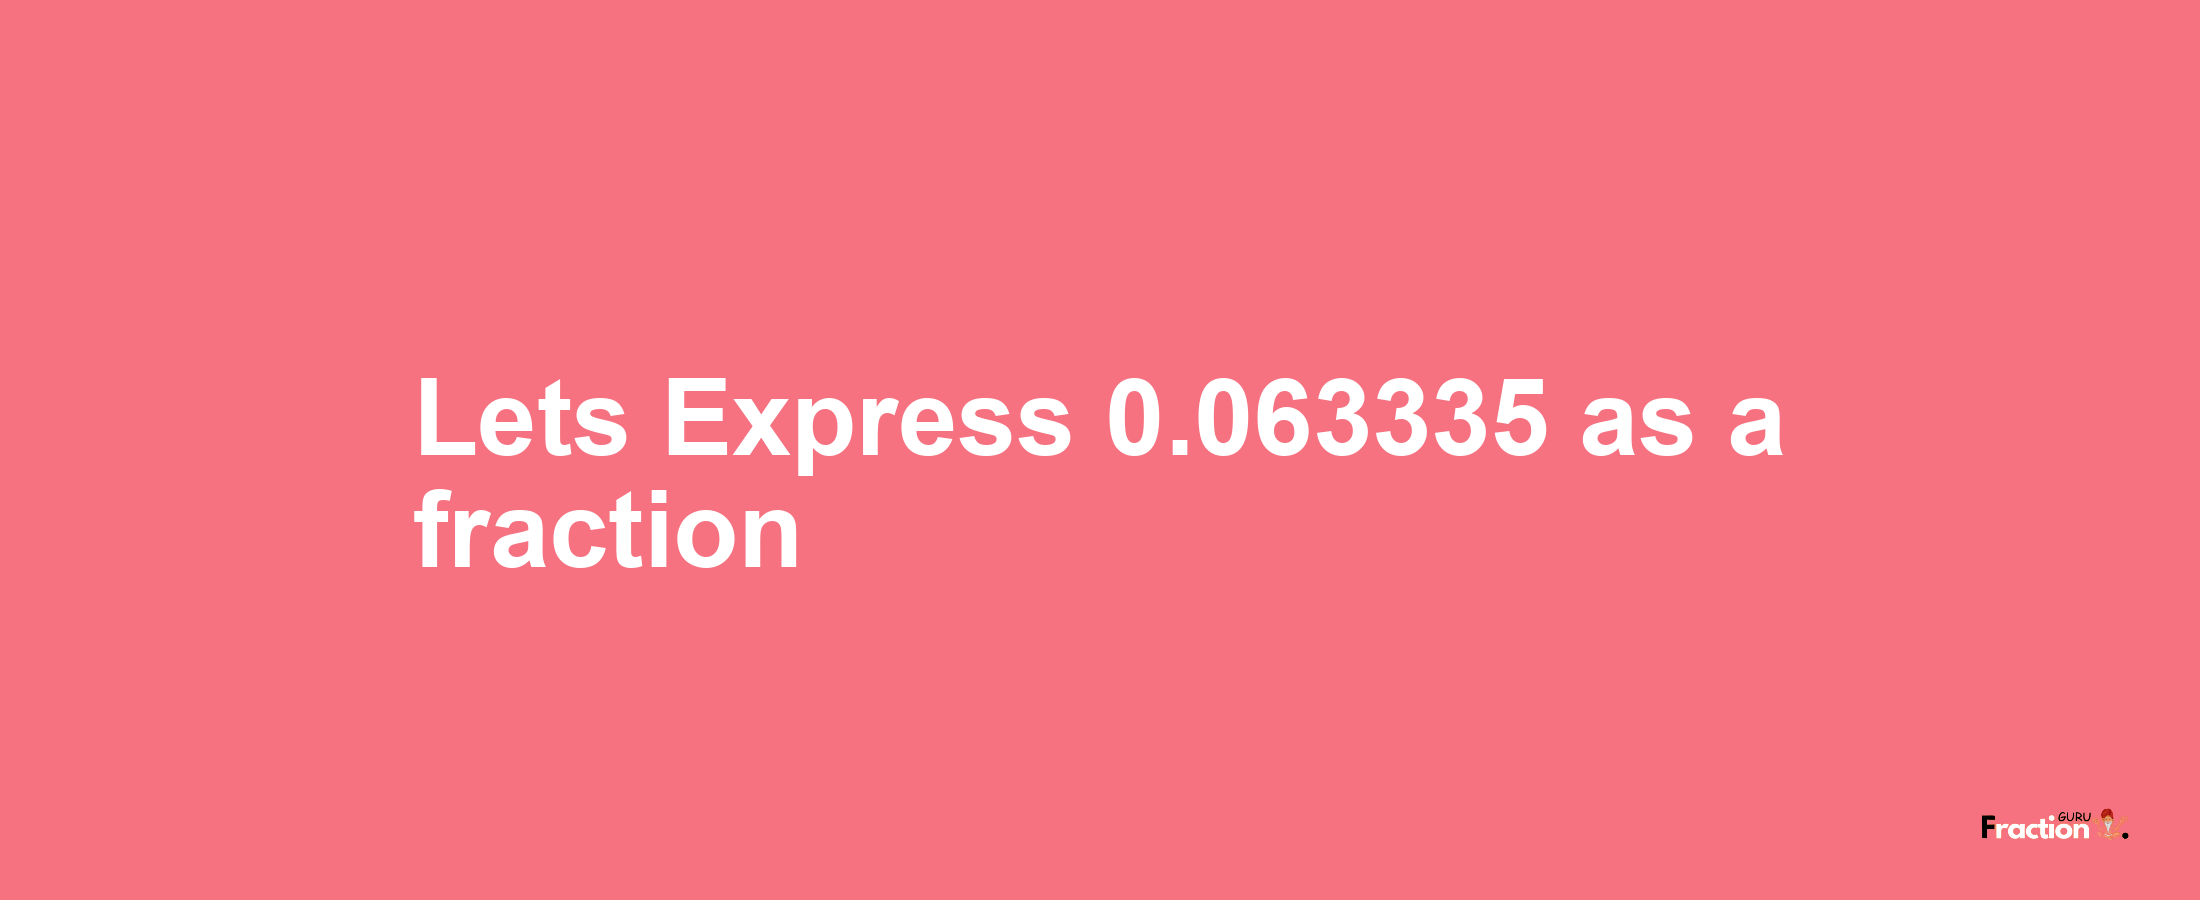 Lets Express 0.063335 as afraction